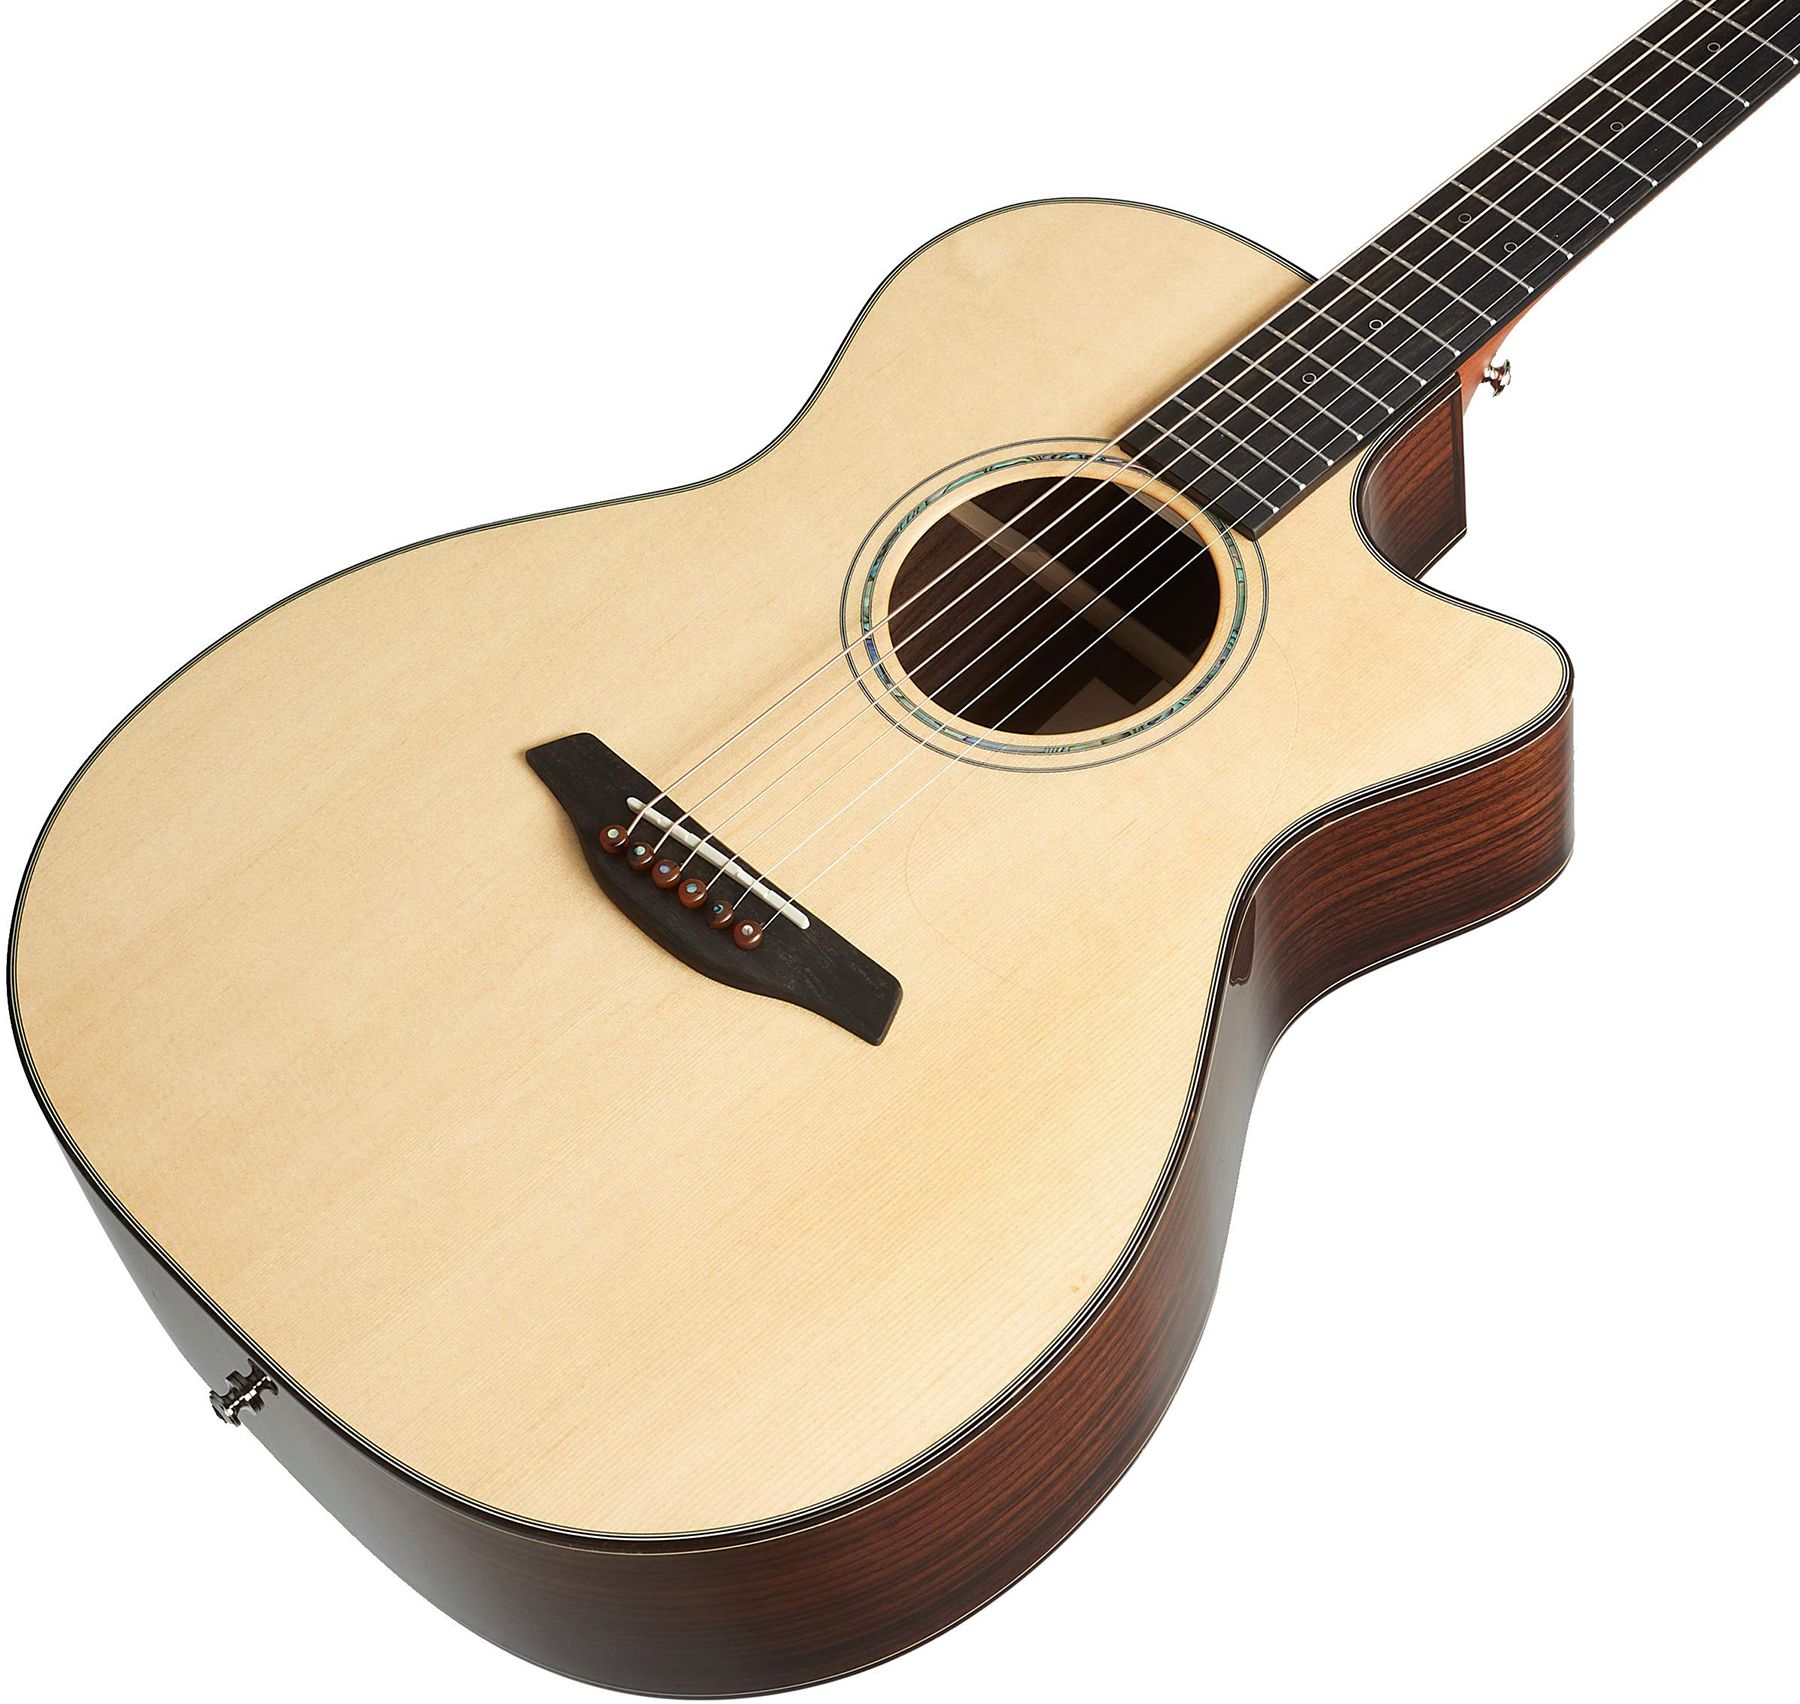 Furch Omc-sr Lrb1 Yellow Orchestra Model Epicea Palissandre Eb - Natural Full-pore - Electro acoustic guitar - Variation 2